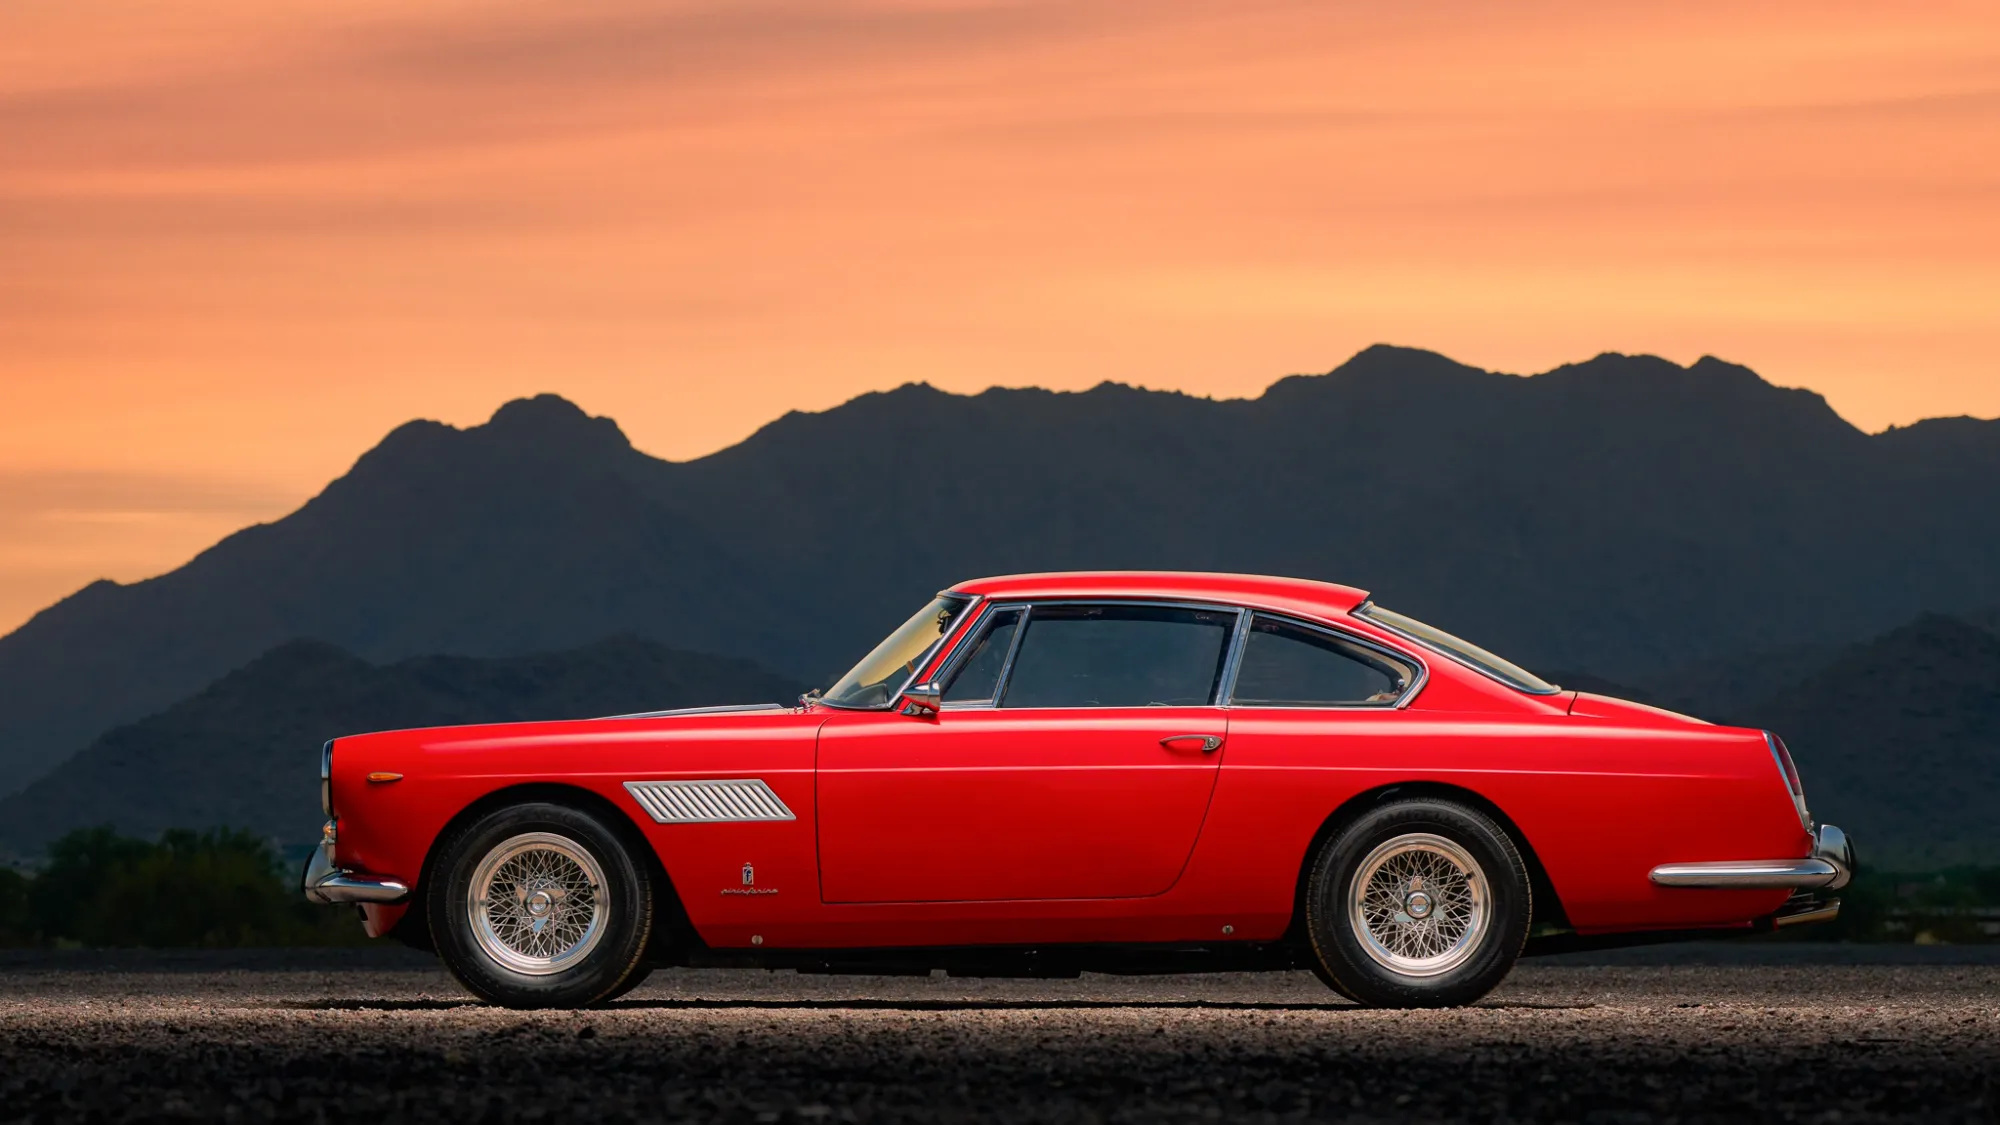 handpicked, sports, american, news, newsletter, highlights, muscle, client, classic, modern classic, europe, features, luxury, trucks, celebrity, off-road, german, 1964 ferrari 330 america is selling on bring a trailer will have you seeing red